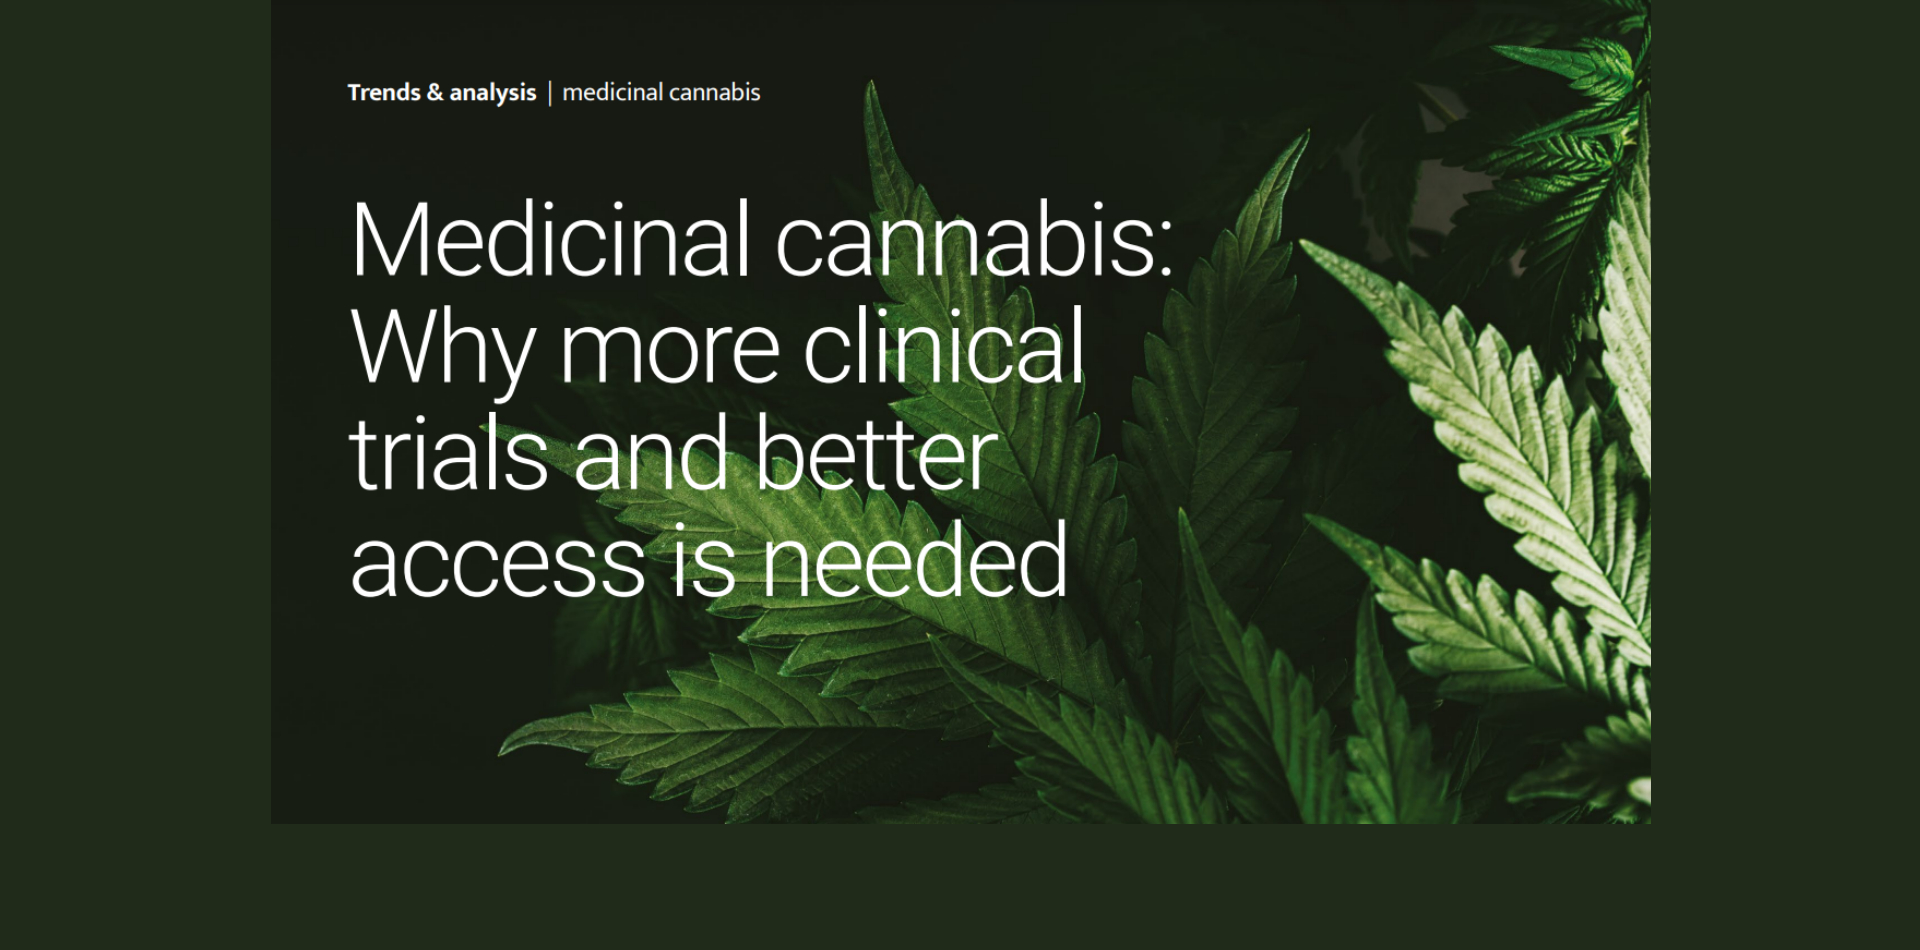 Medicinal cannabis: Why more clinical trials and better access is needed